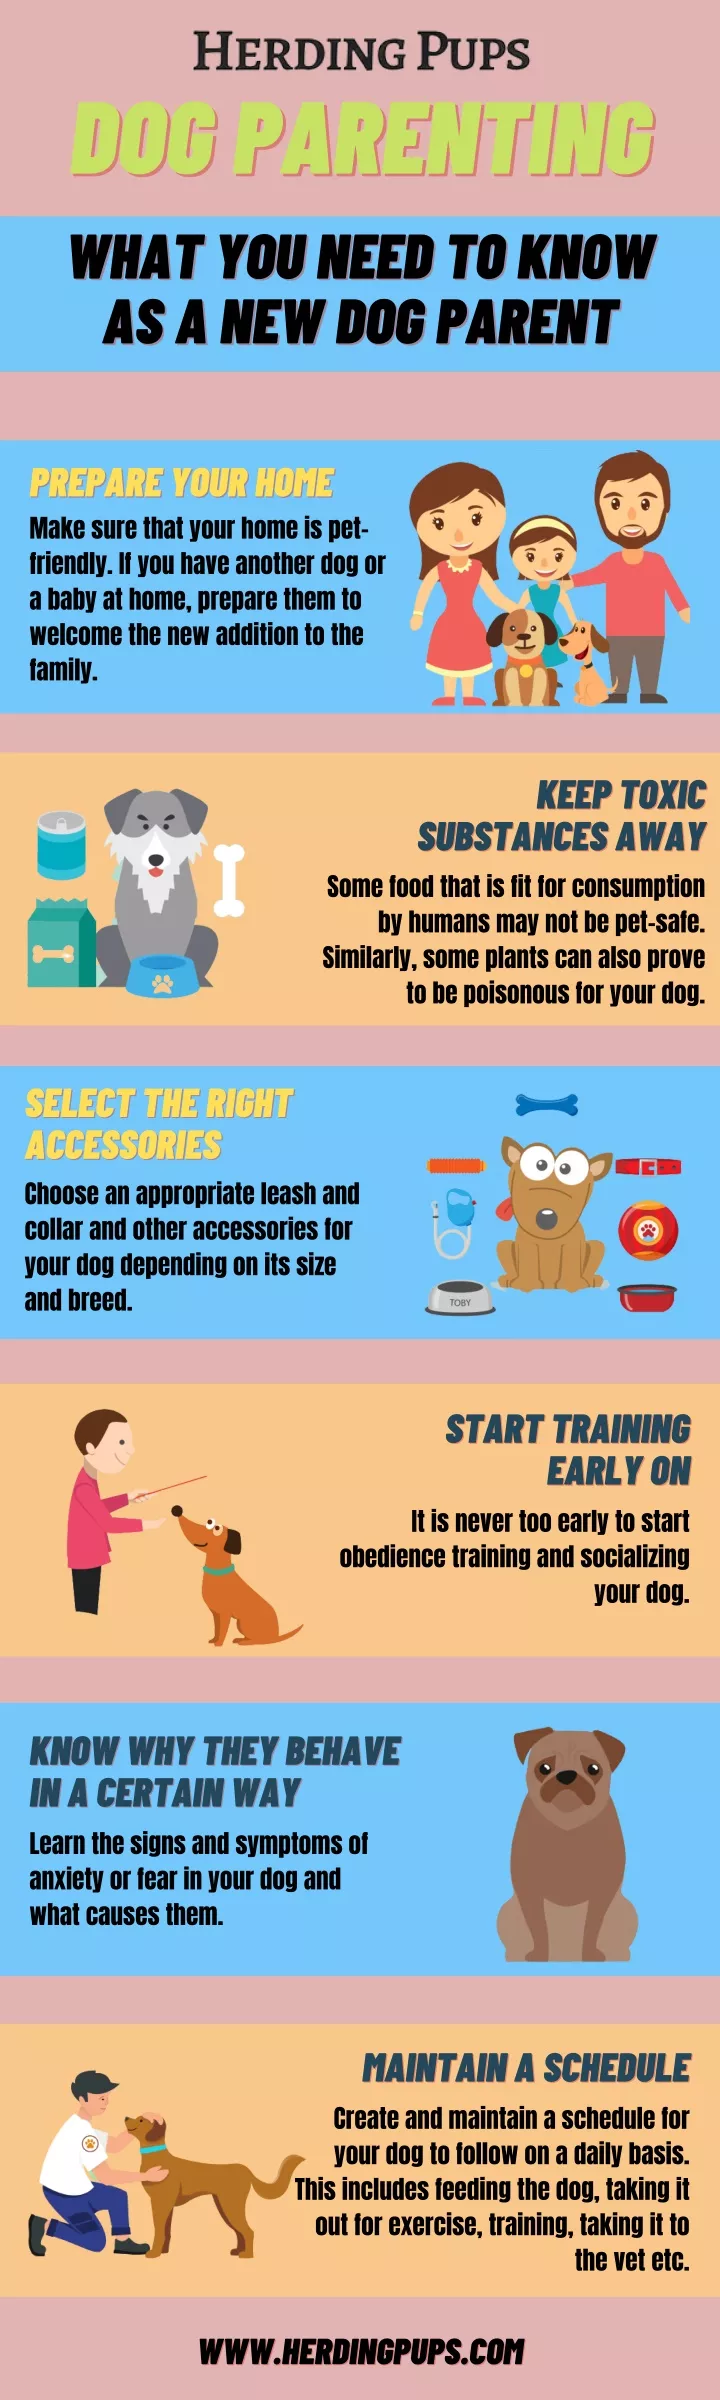 dog parenting dog parenting what you need to know